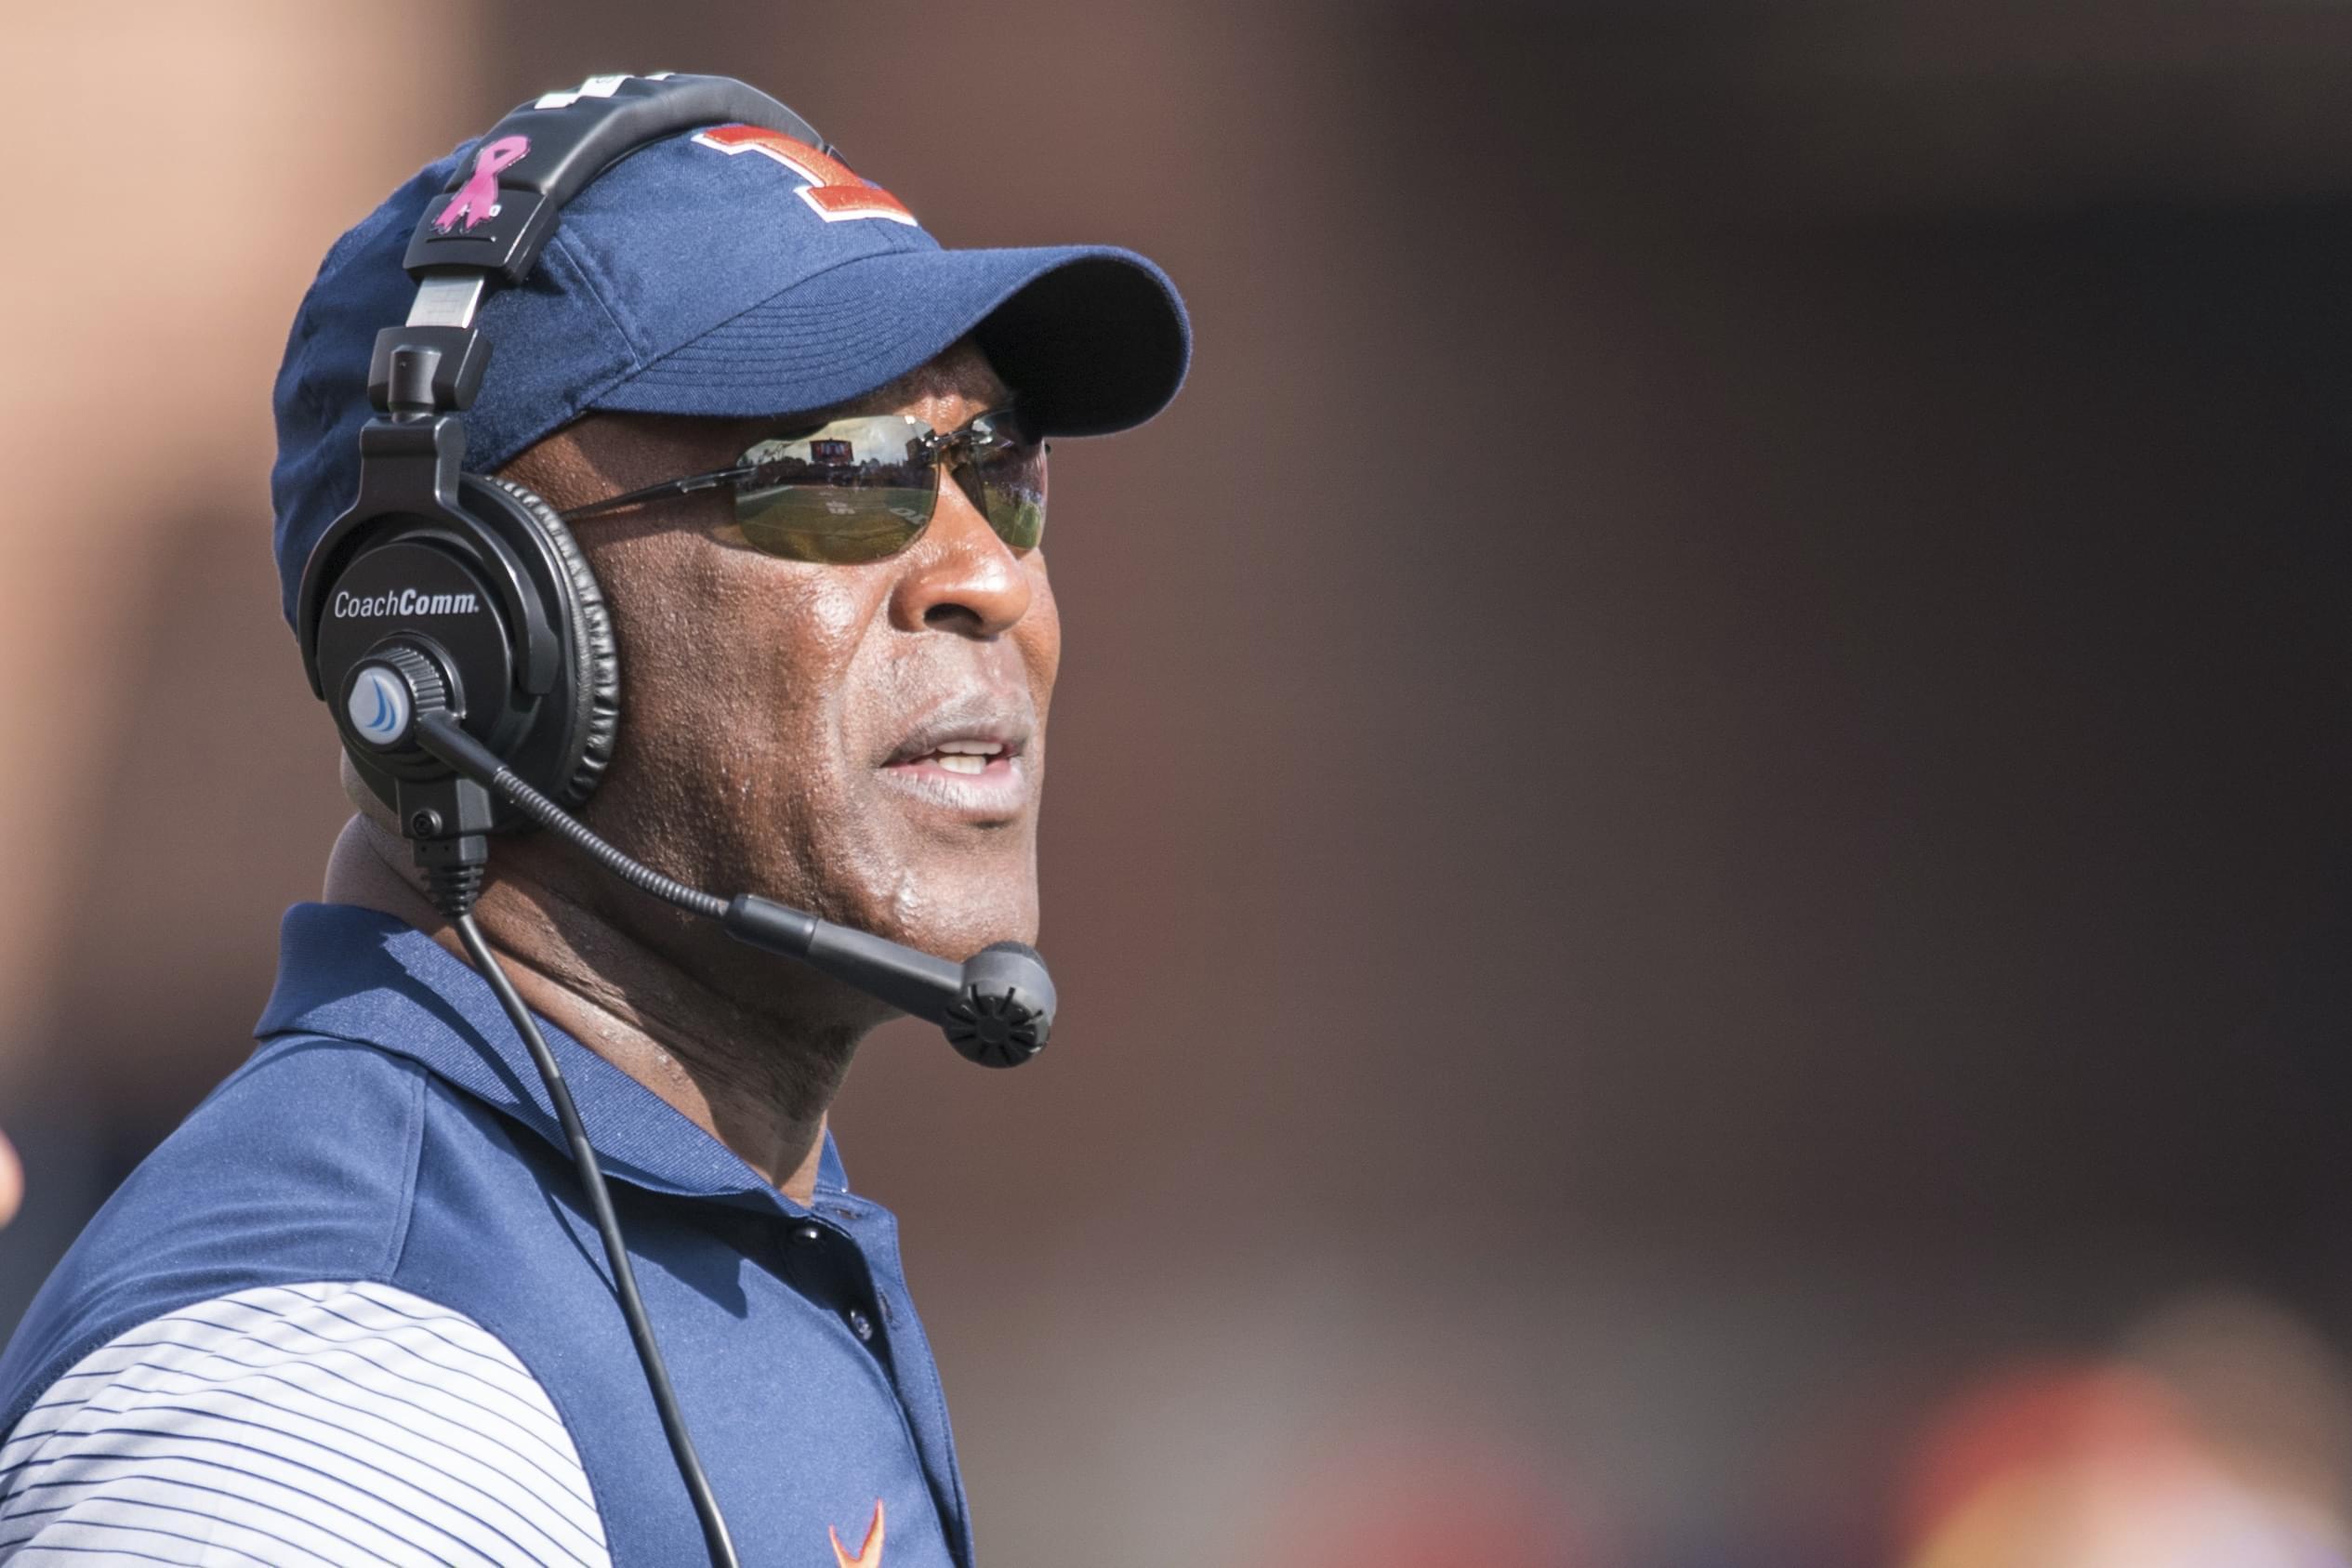 Illinois head coach Lovie Smith looks at the scoreboard during the second quarter of an NCAA college football game against Minnesota, Saturday, Oct. 29, 2016, at Memorial Stadium in Champaign